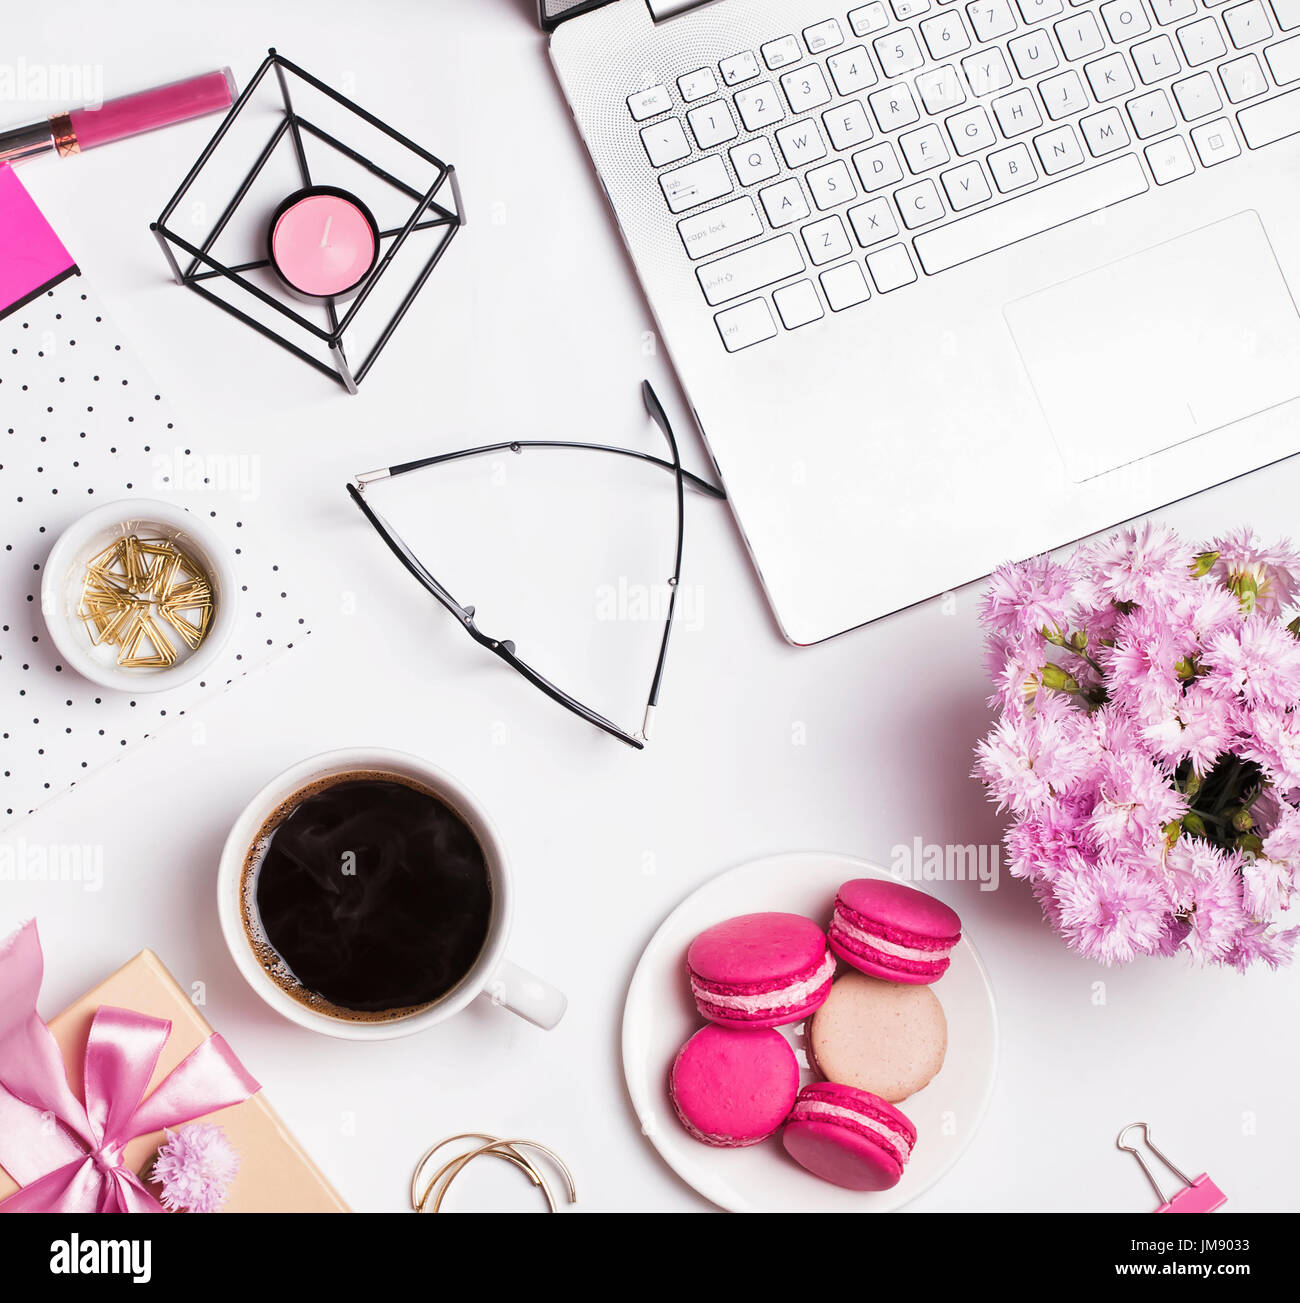 Woman's workplace concept. Coffee, laptop and different small objects on white. Stock Photo